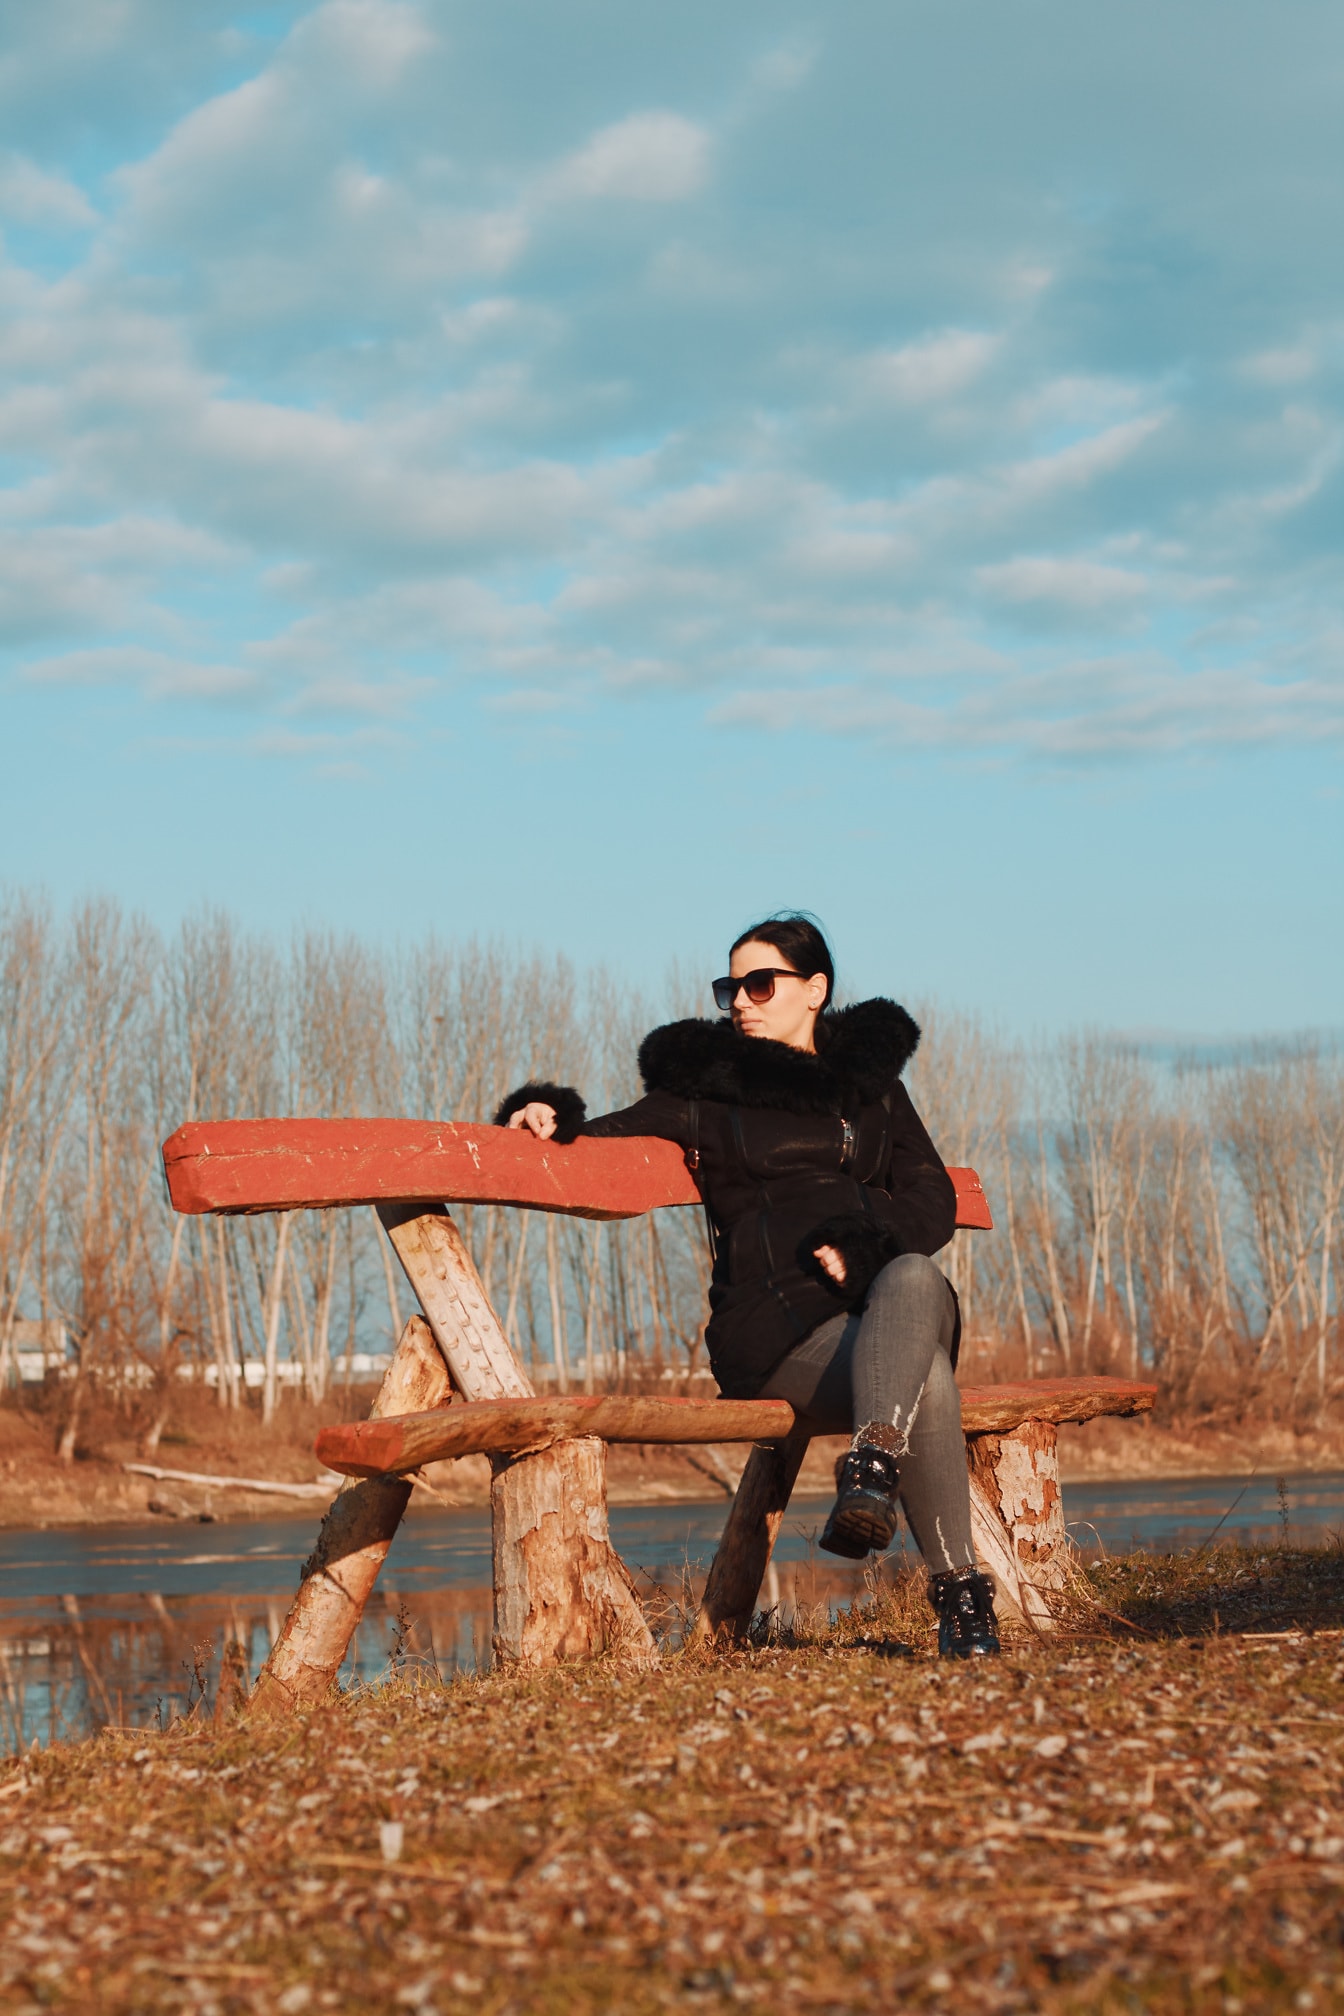 Brunette young woman sitting on wooden bench in black jacket